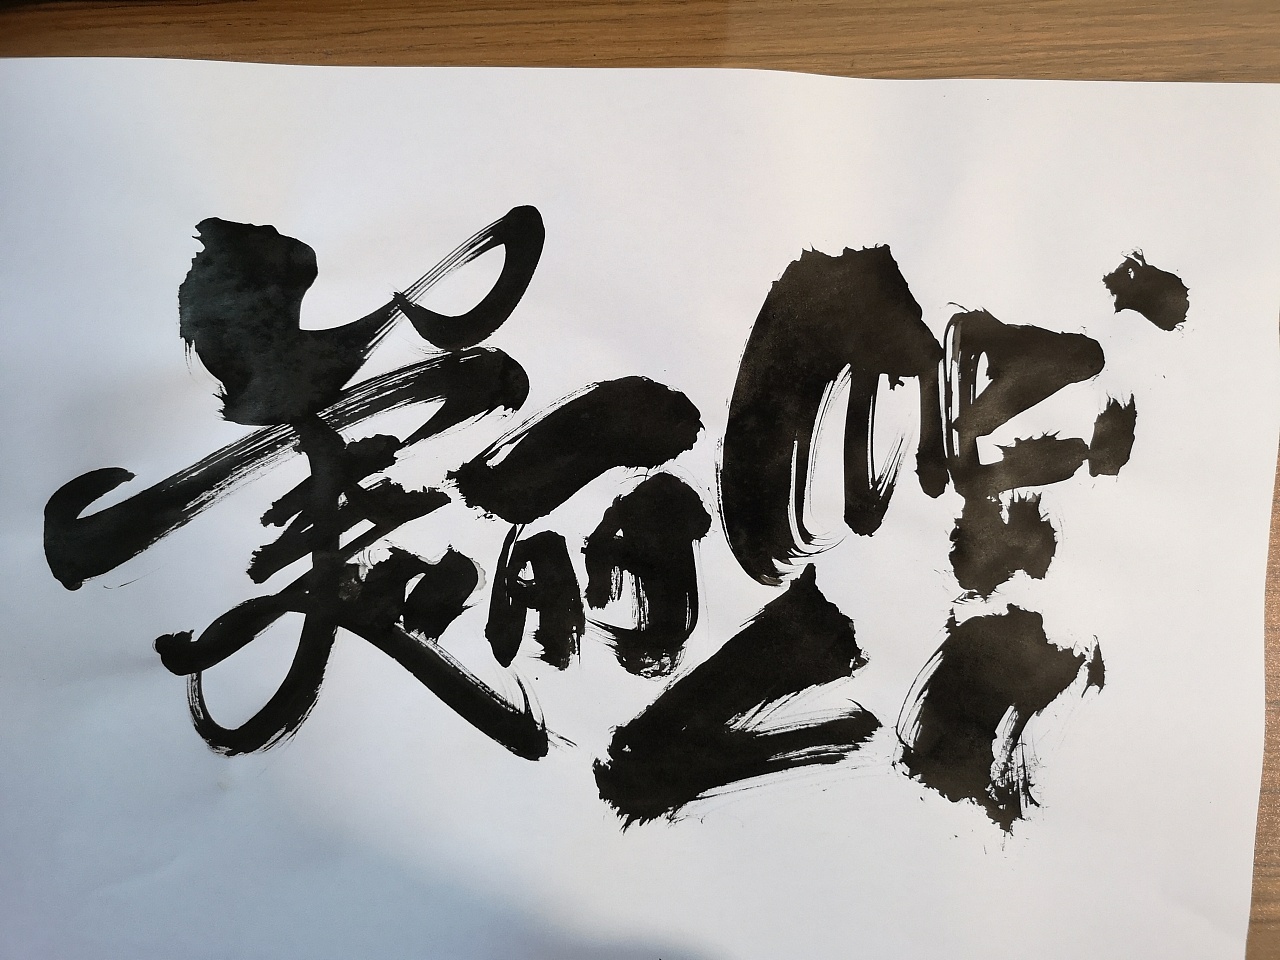 45P Chinese traditional calligraphy brush calligraphy font style appreciation #.1009